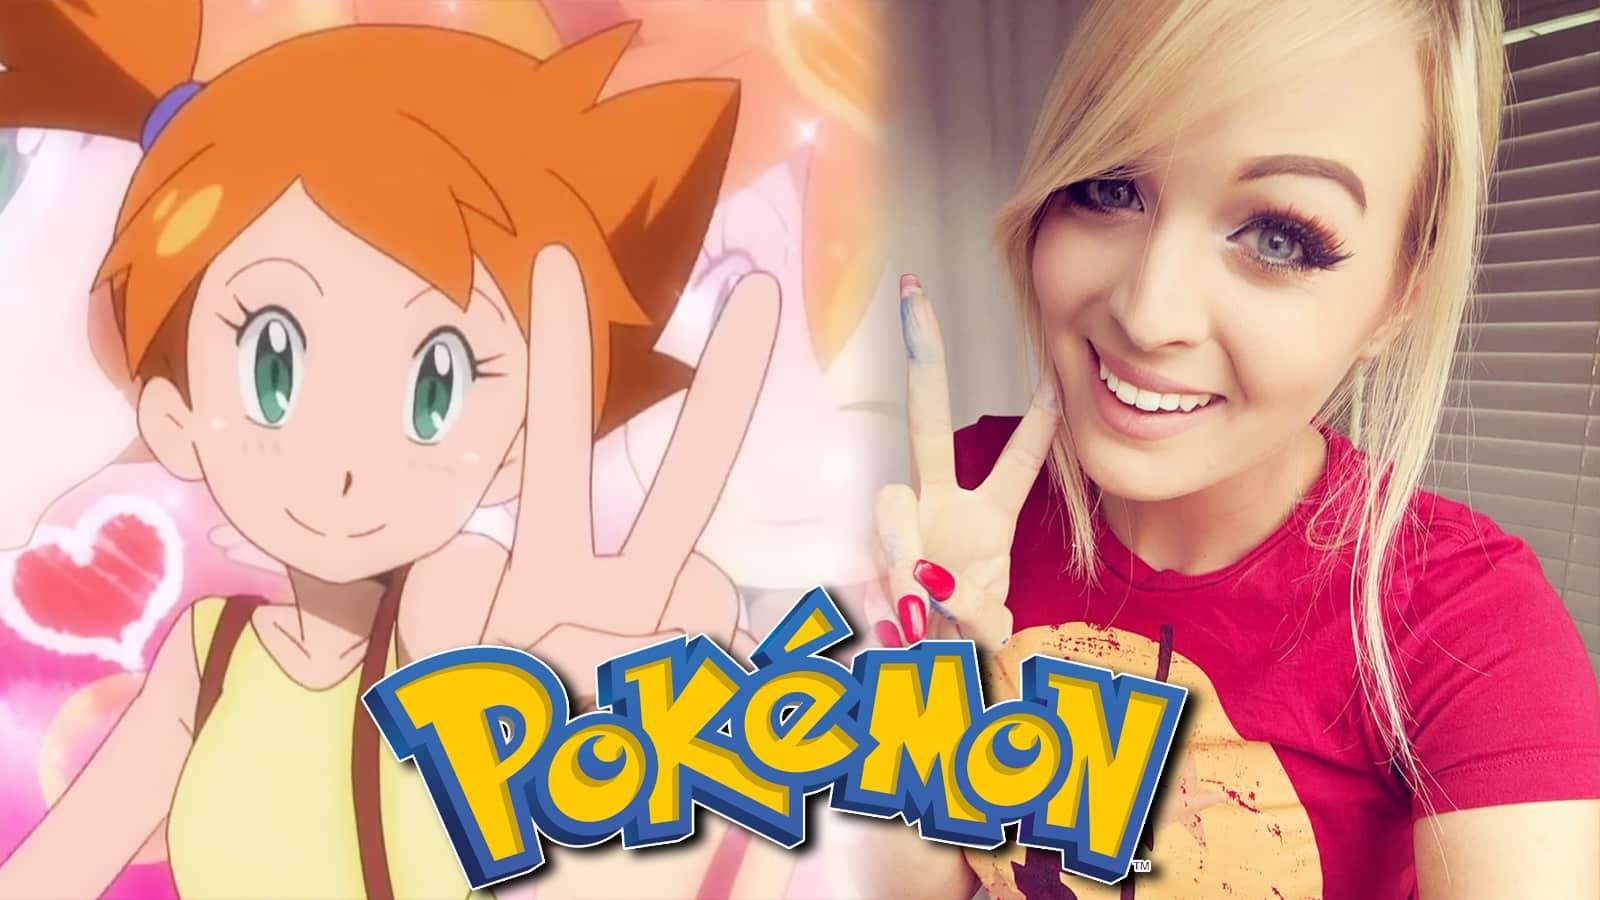 Screenshot of Misty from Pokemon anime next to cosplayer.